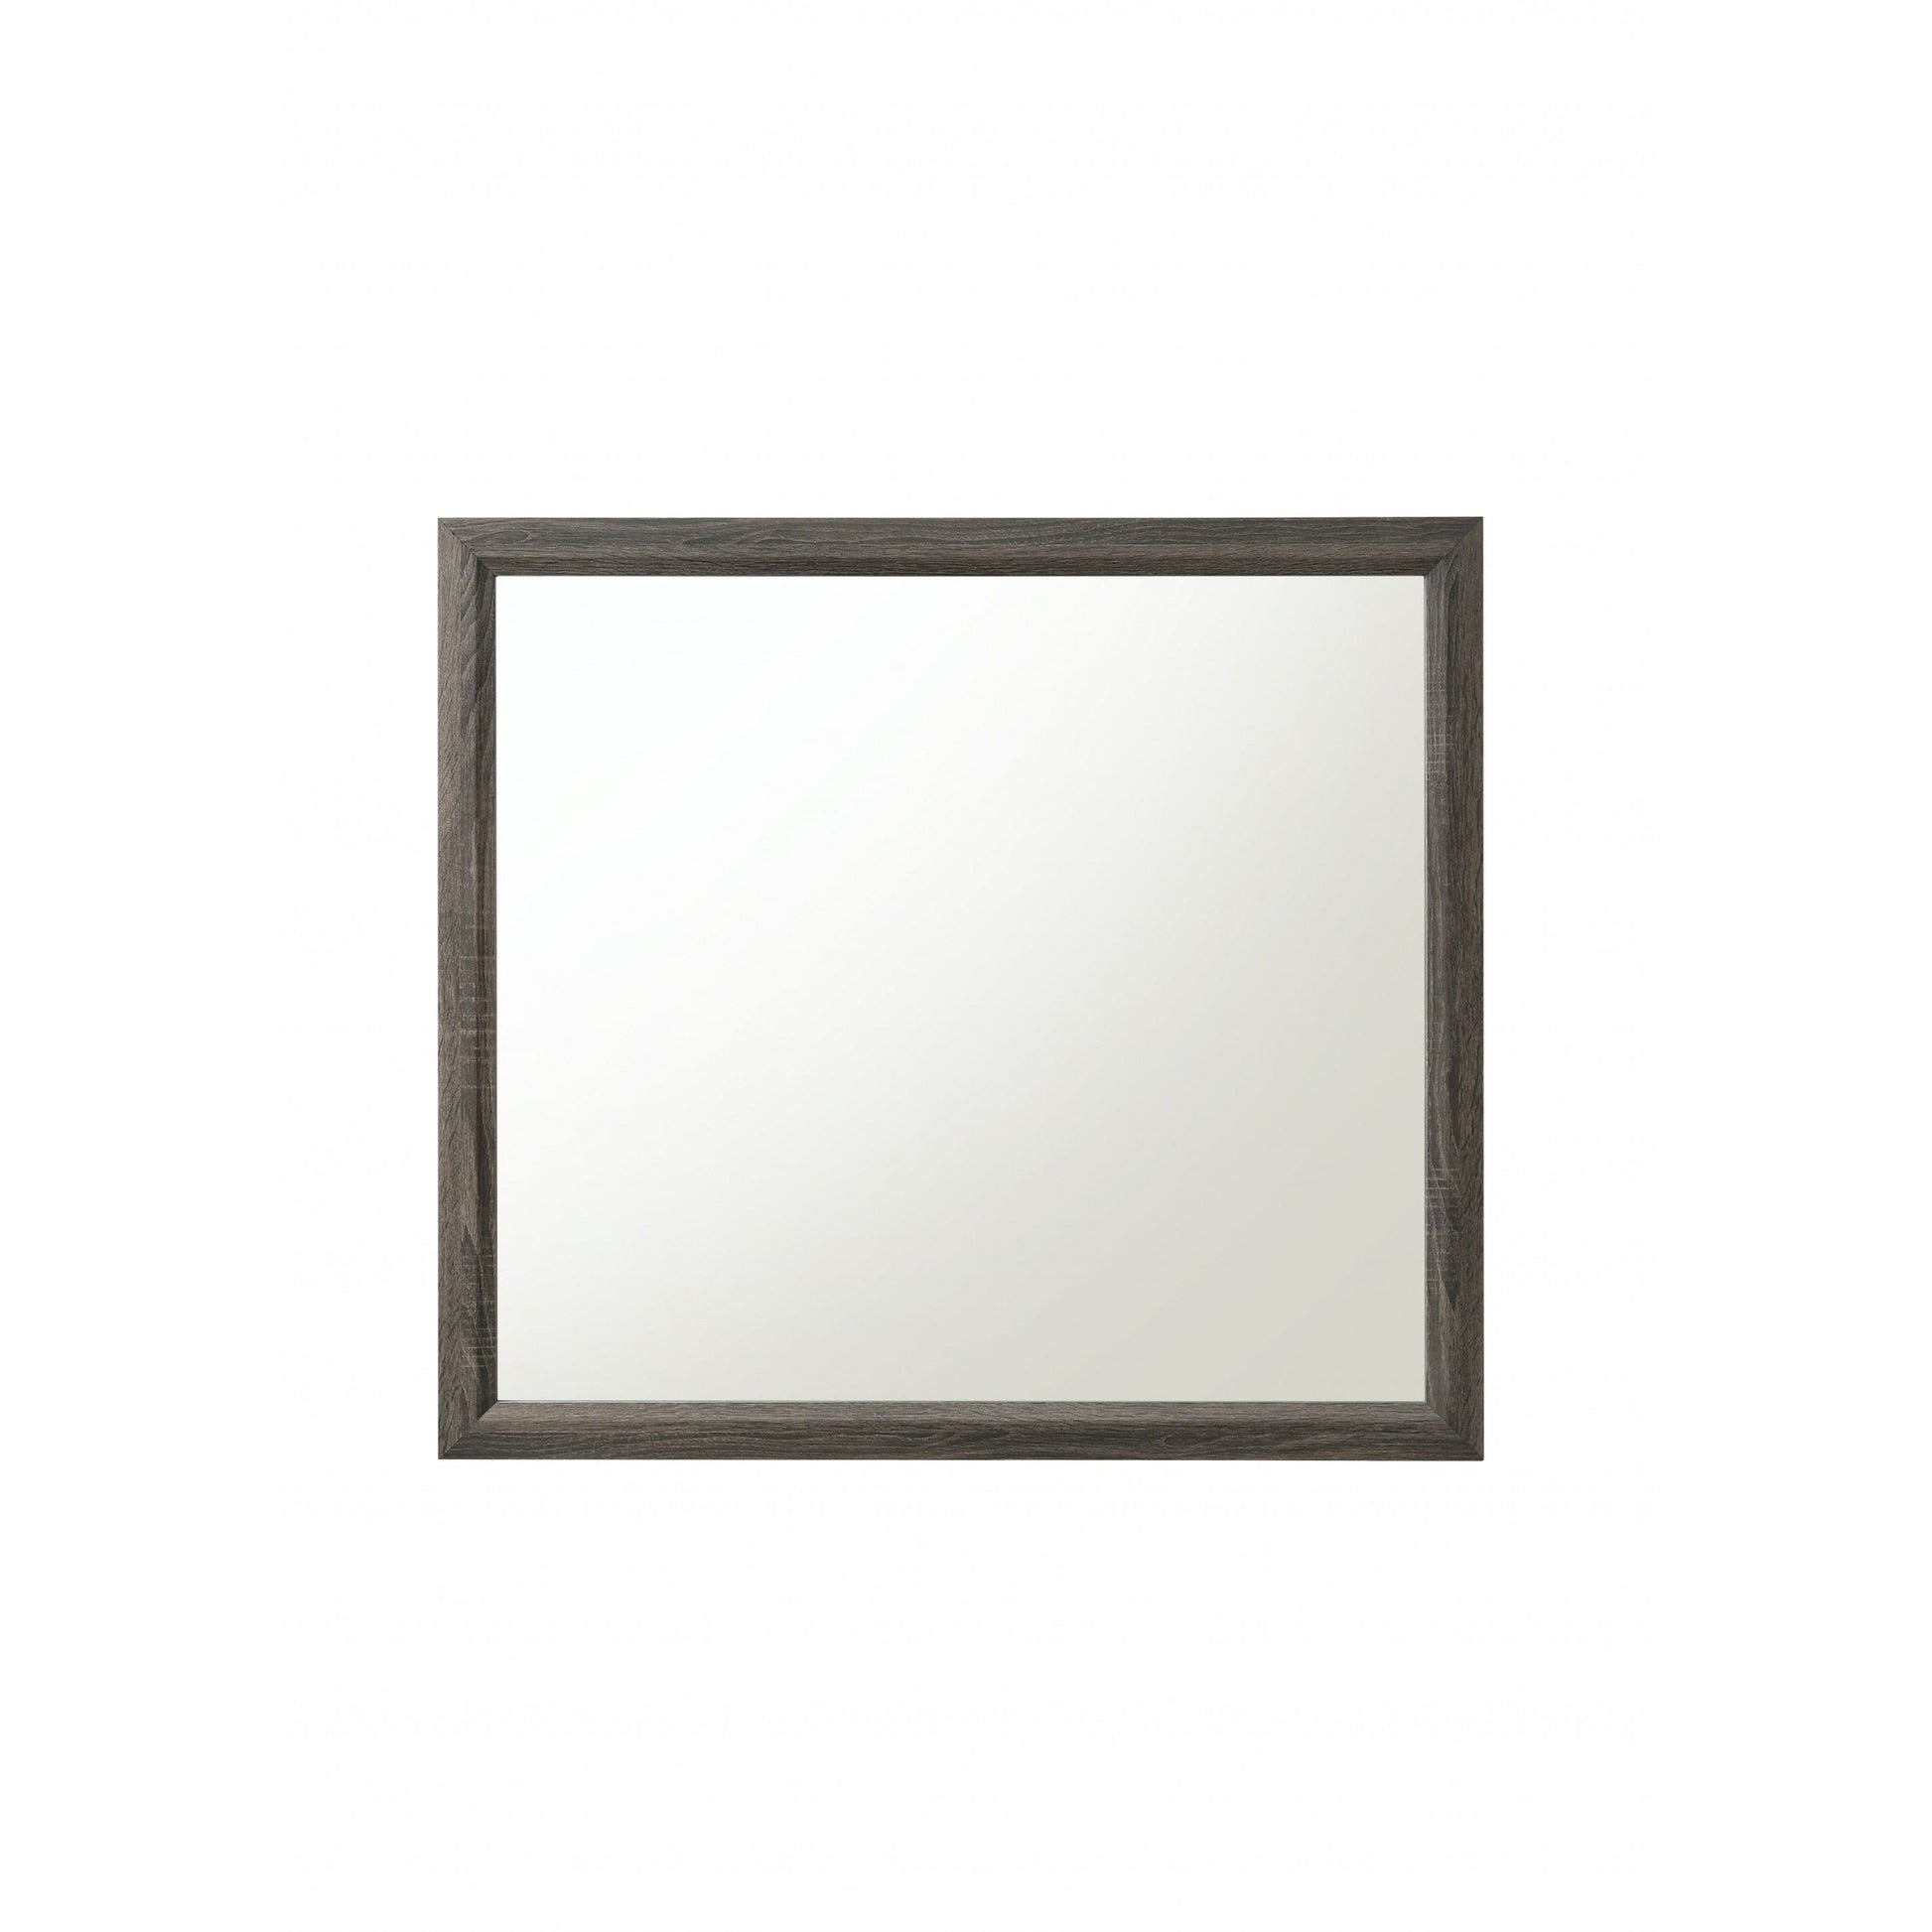 HomeRoots 35" Rectangle Wall Mounted Accent Mirror With Frame In Gray Finish